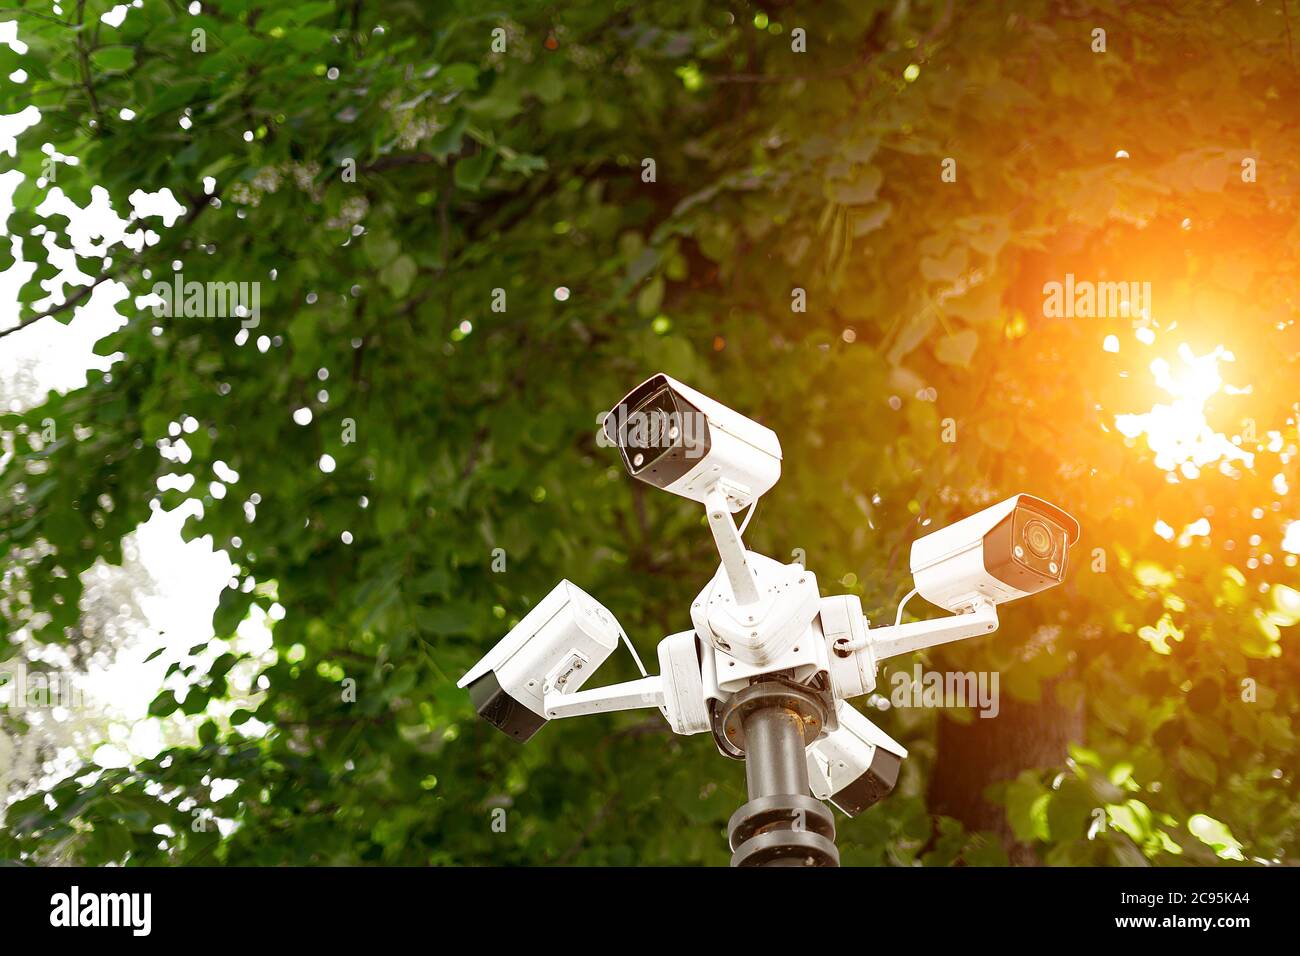 video surveillance system on a pole in the park close-up Stock Photo